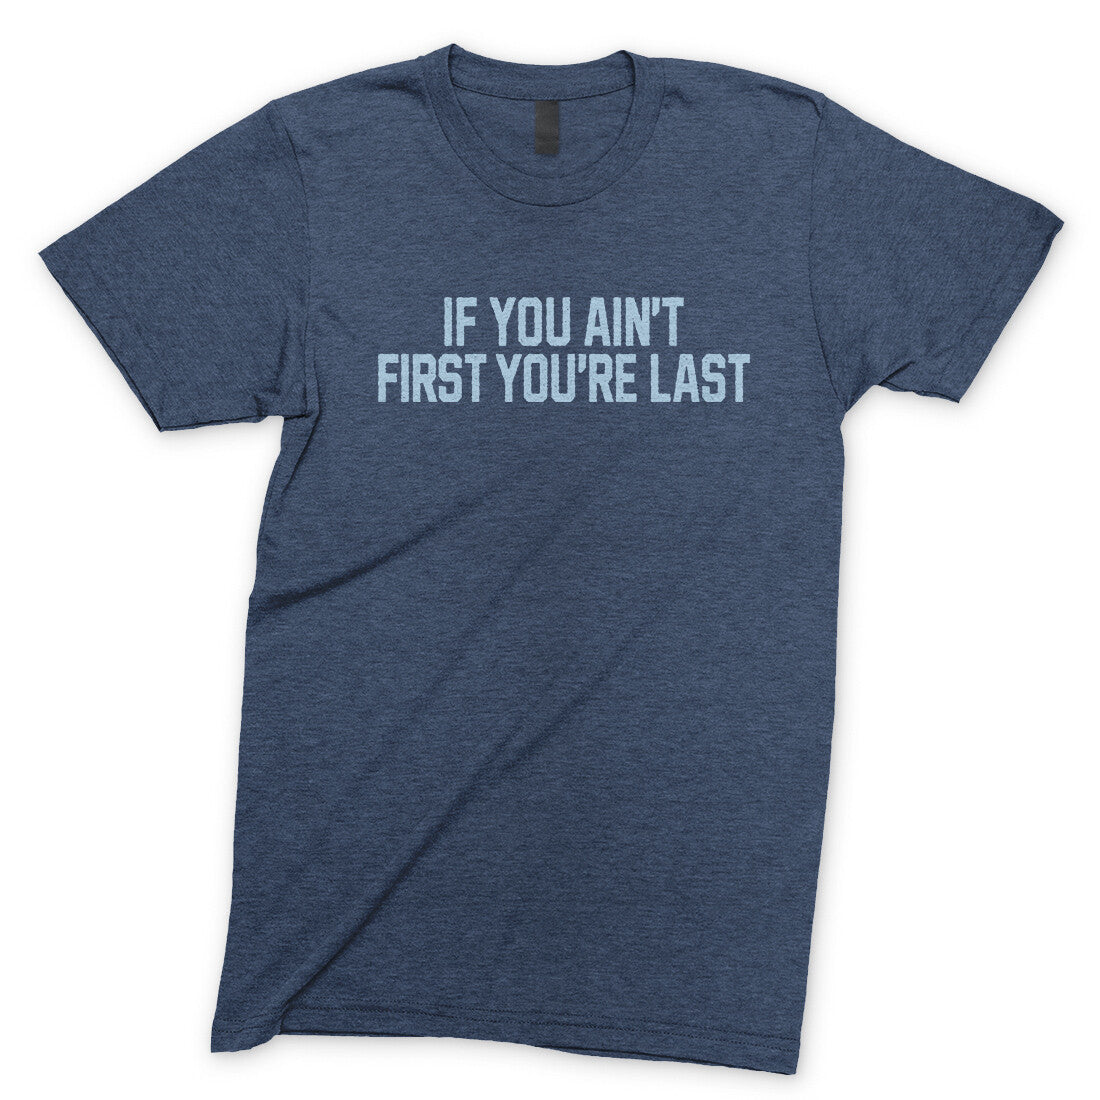 If You Ain't First You're Last in Navy Heather Color